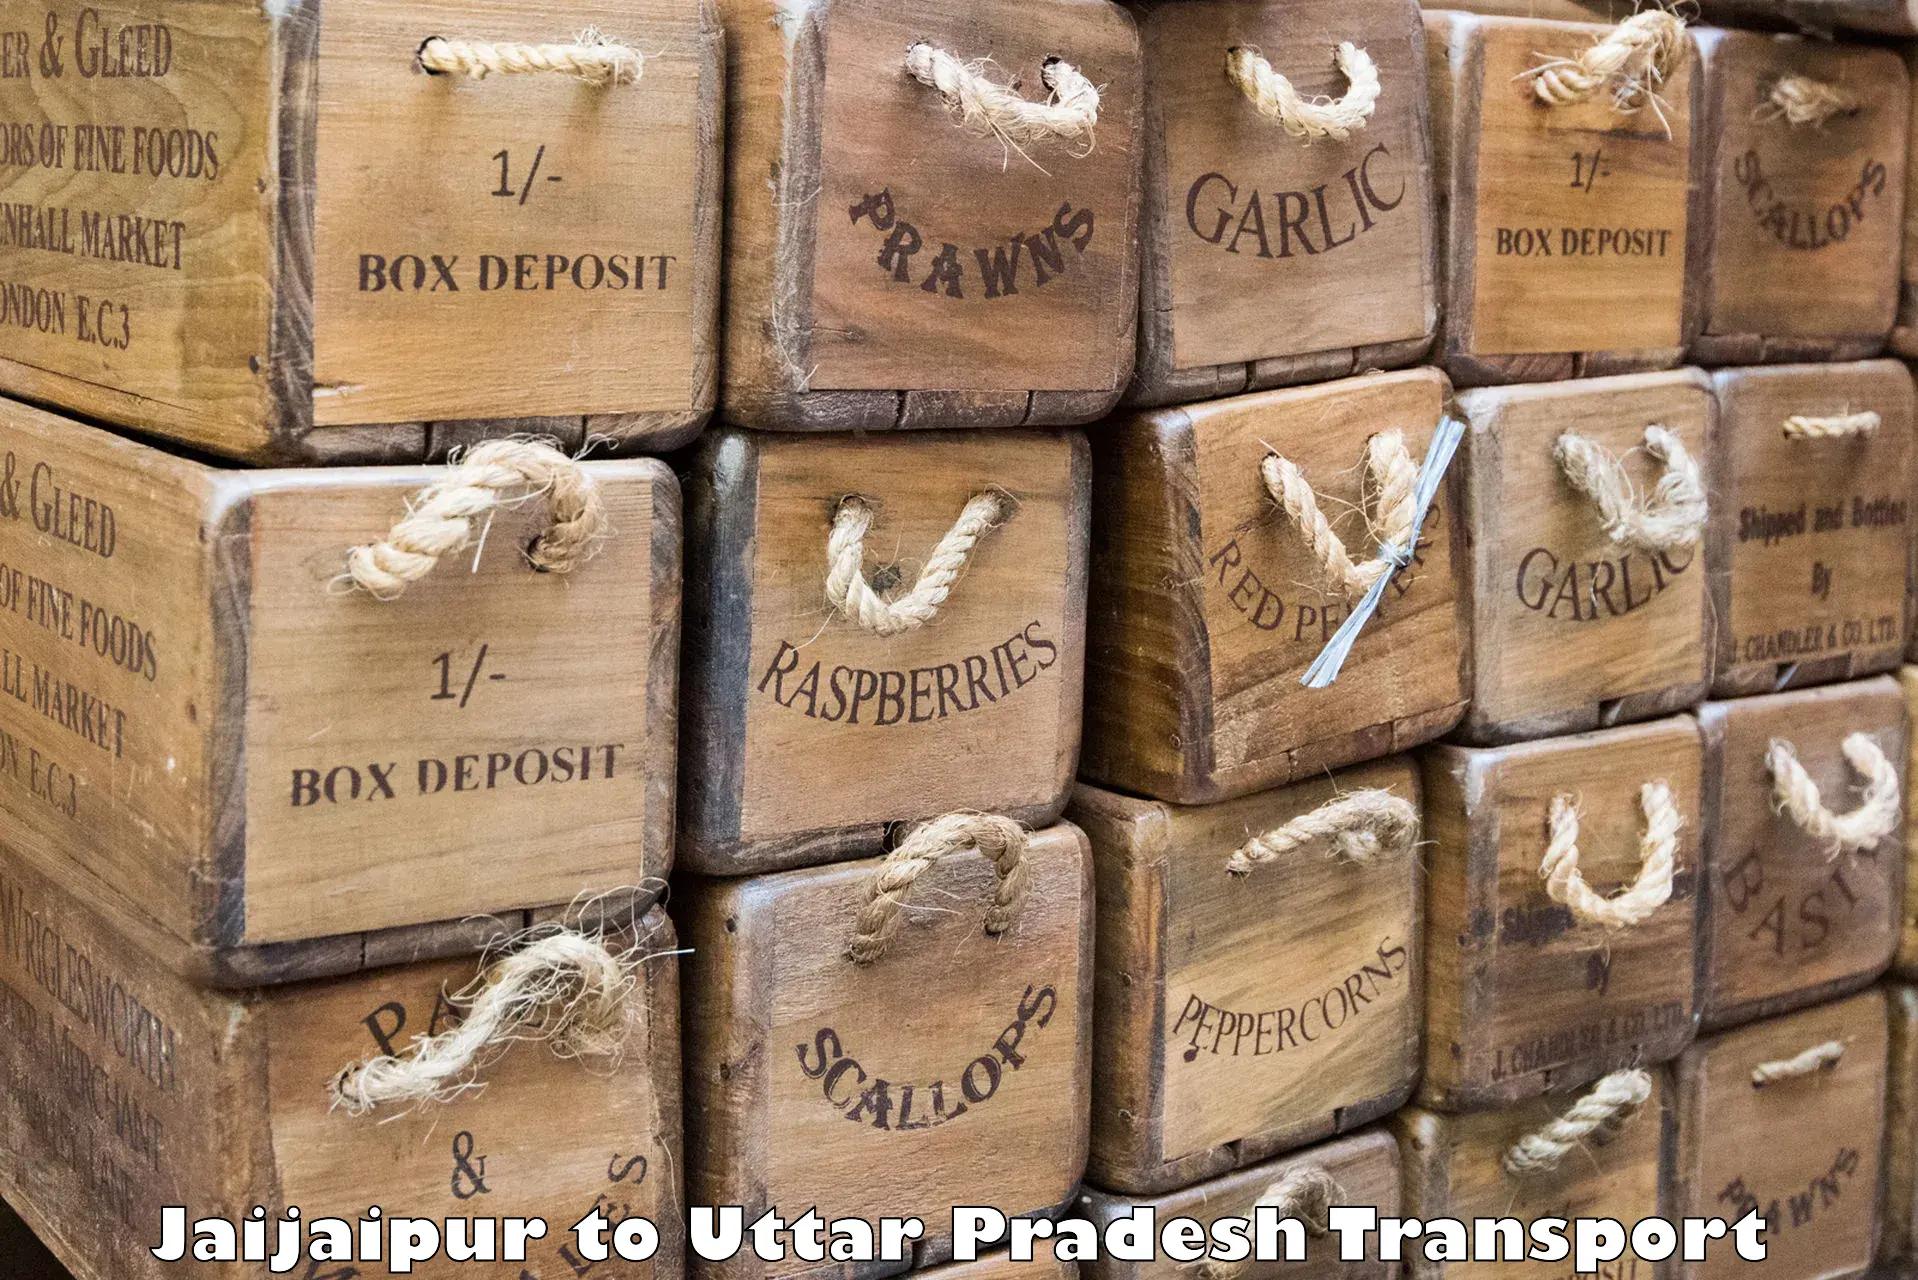 Goods delivery service Jaijaipur to Lucknow